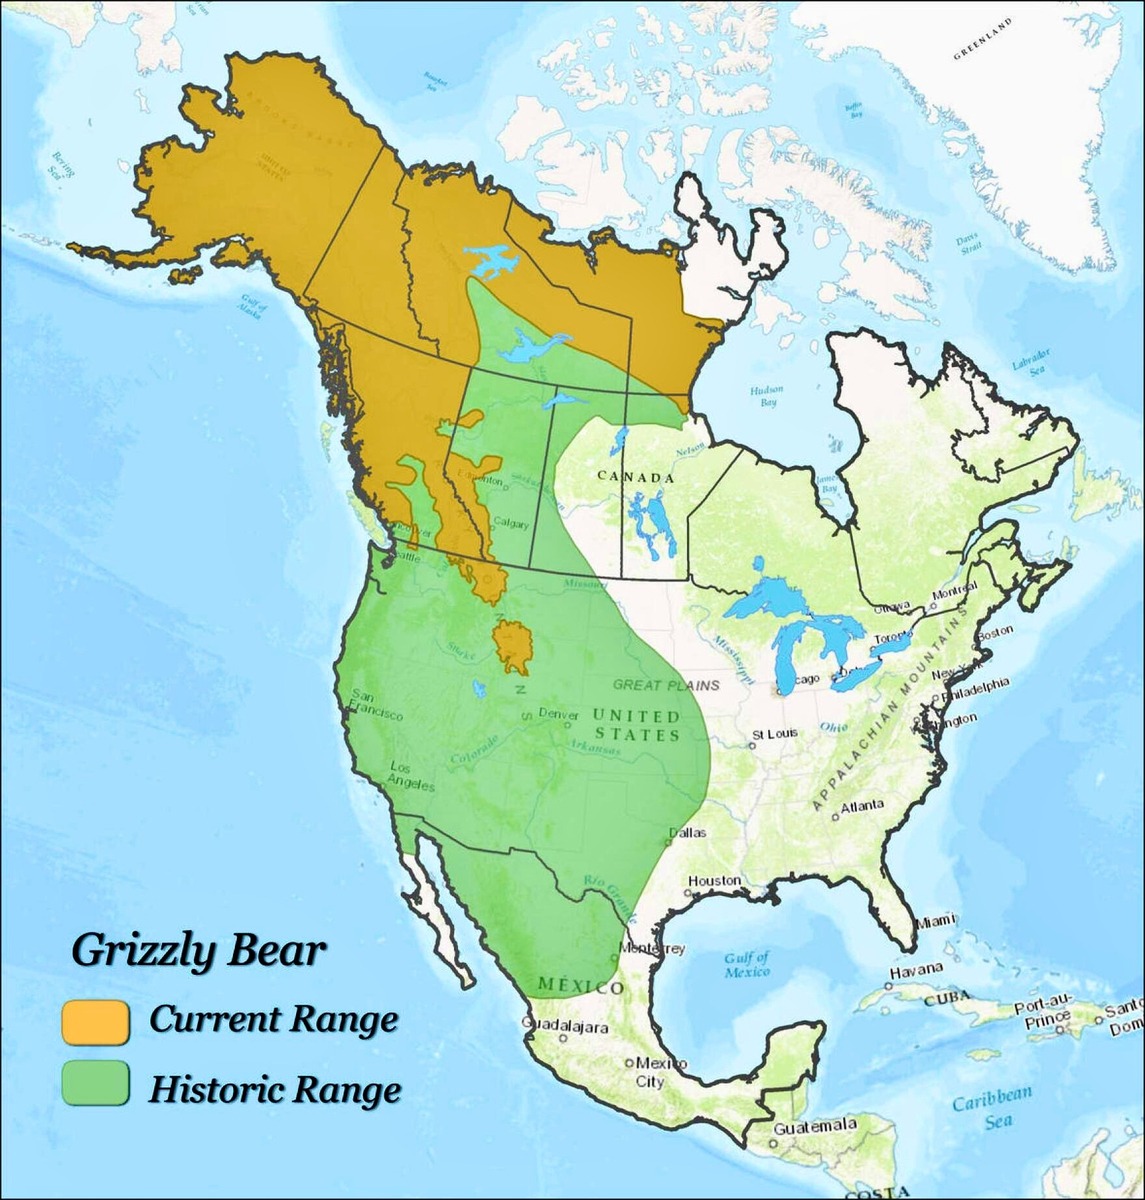 Graphic courtesy USGS Grizzly Bear Study Team